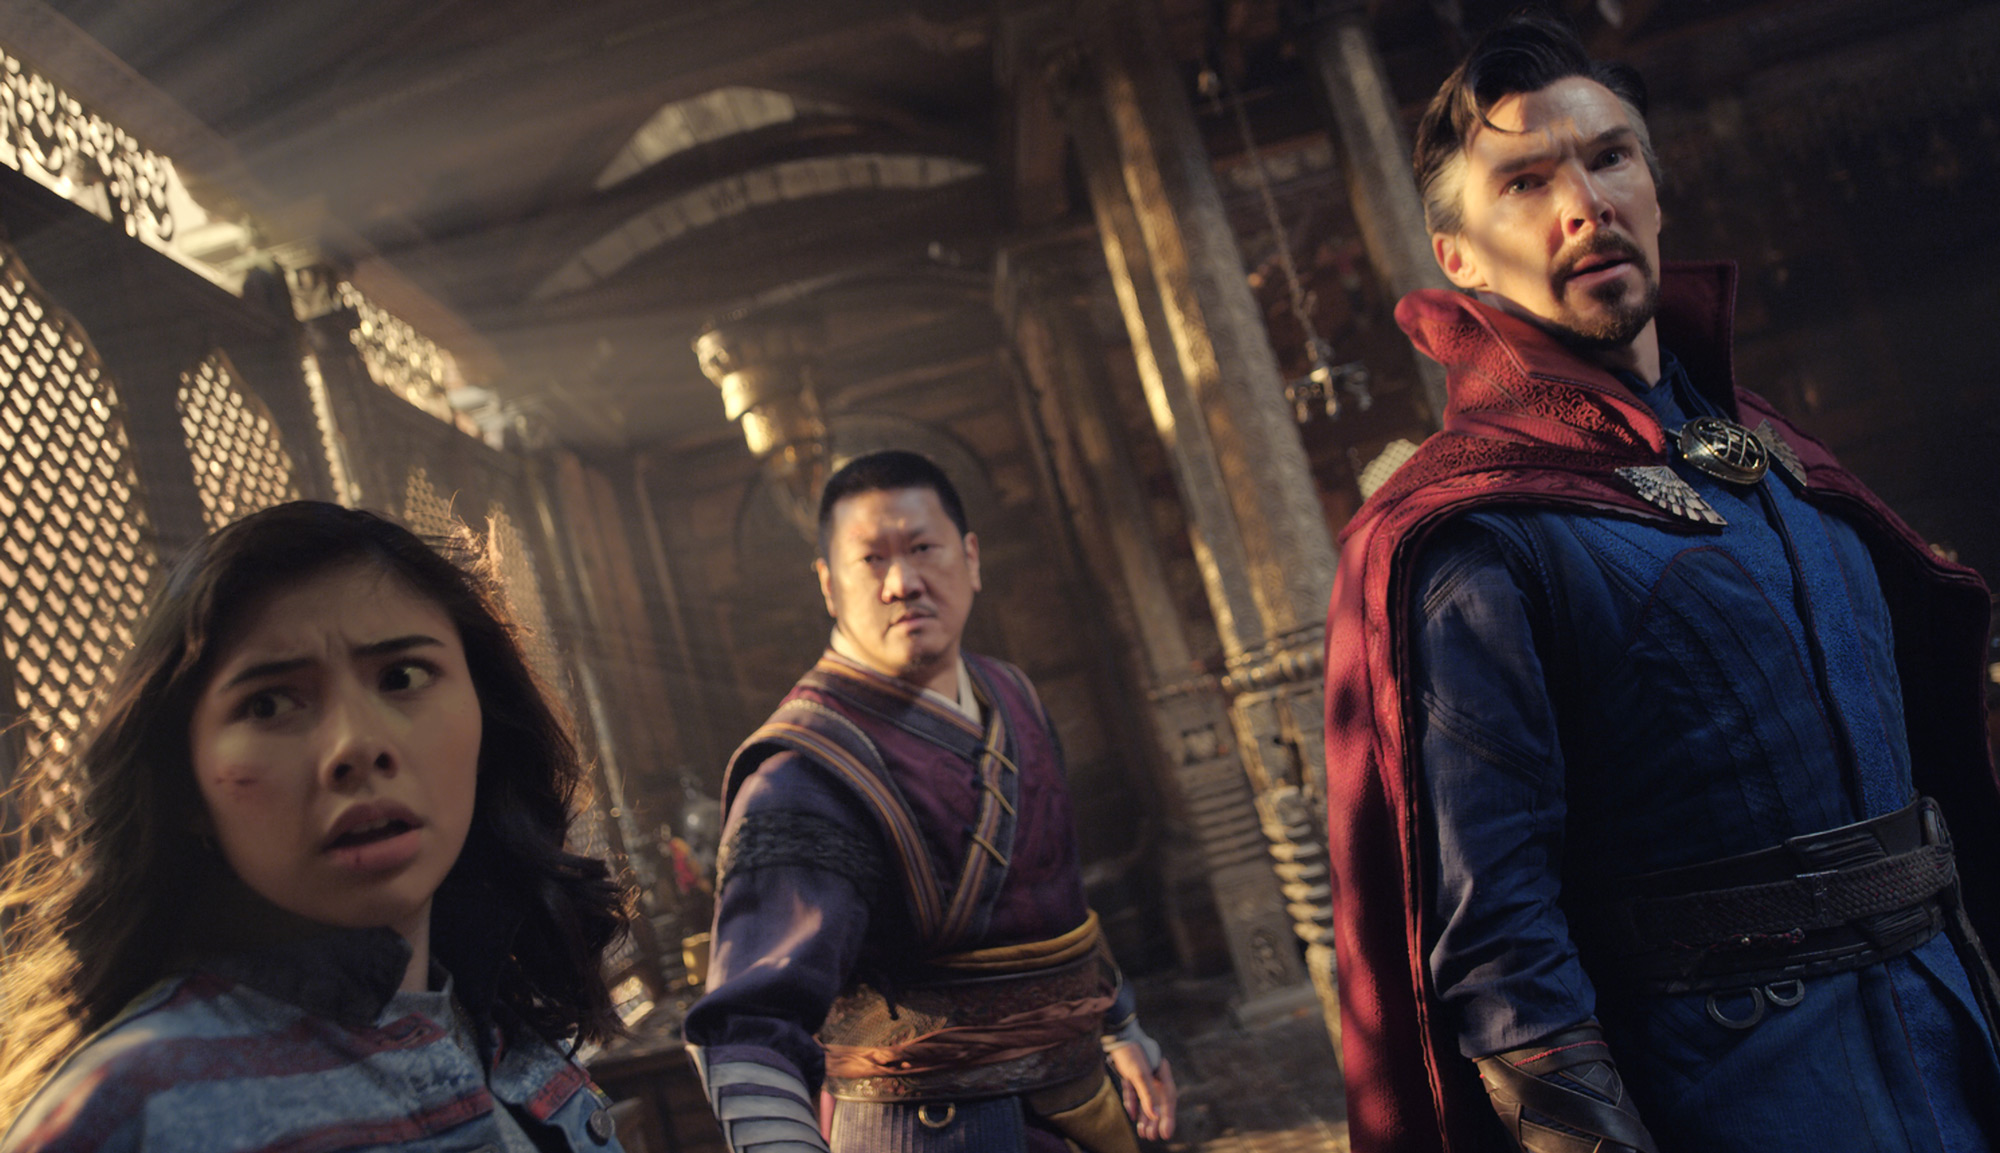 Benedict Cumberbatch, Benedict Wong and Xochitl Gomez in "Doctor Strange in the Multiverse of Madness"